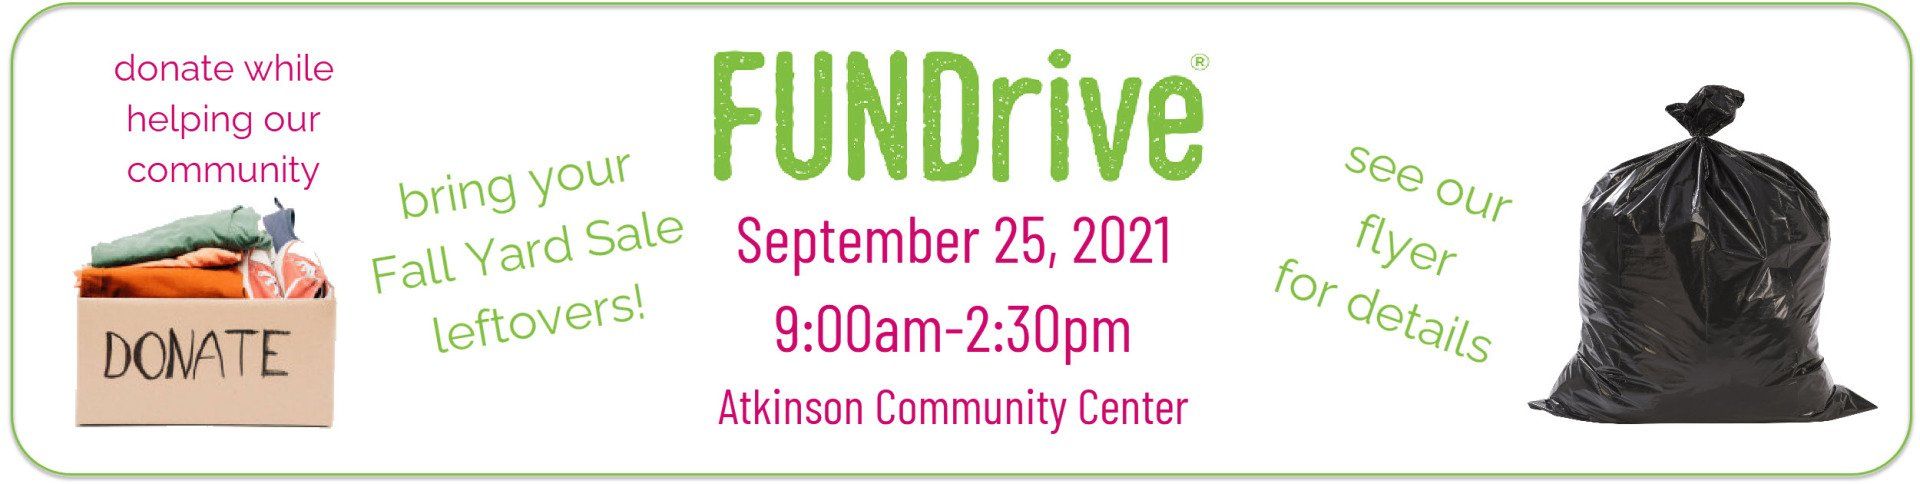 FUNDrive event information